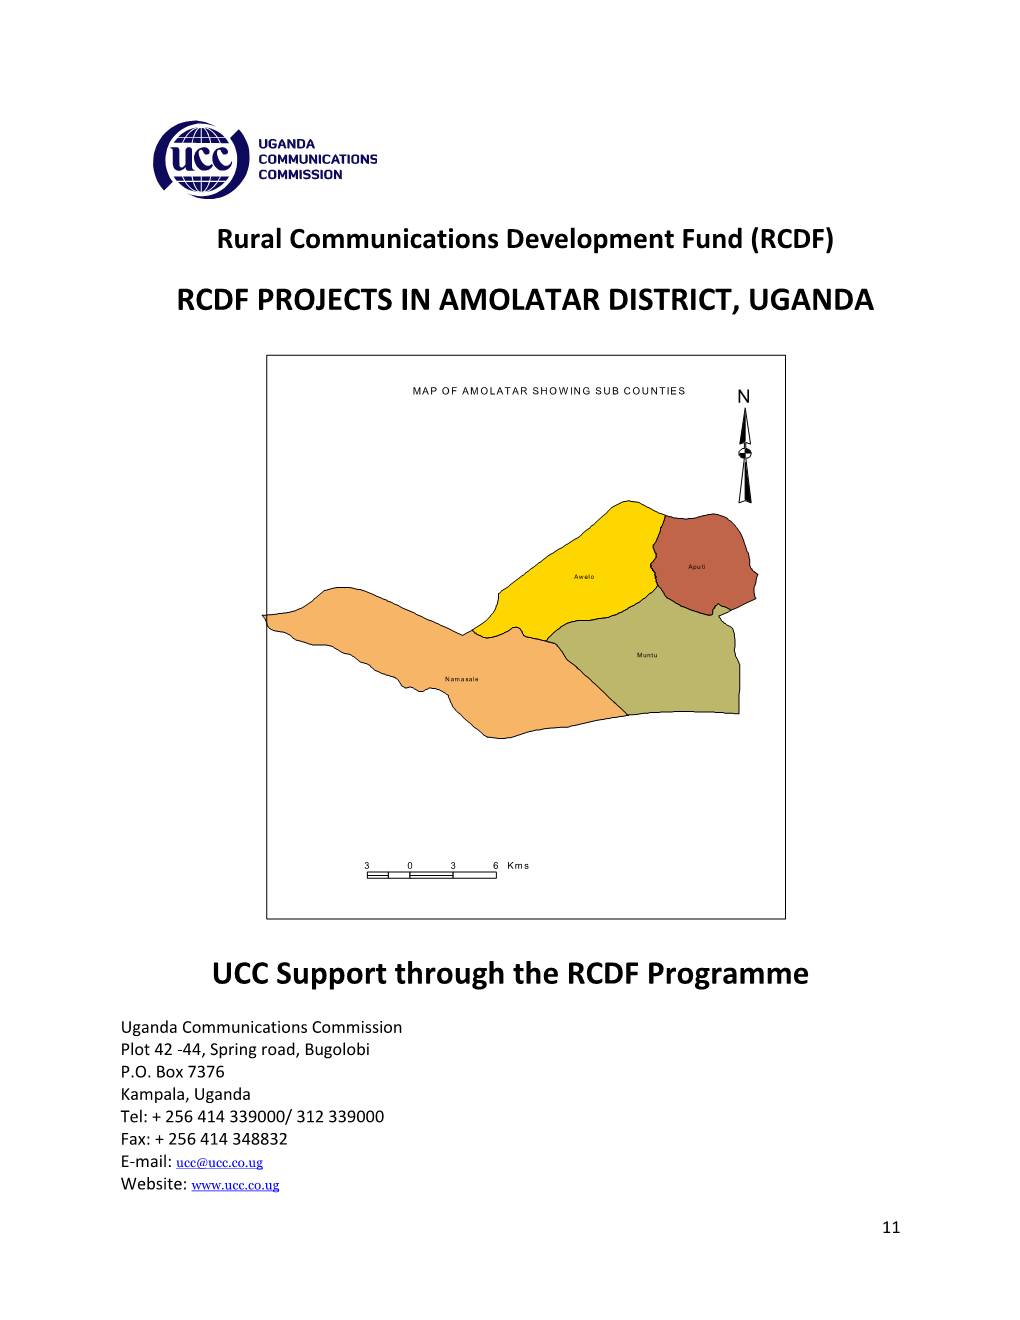 RCDF PROJECTS in AMOLATAR DISTRICT, UGANDA UCC Support